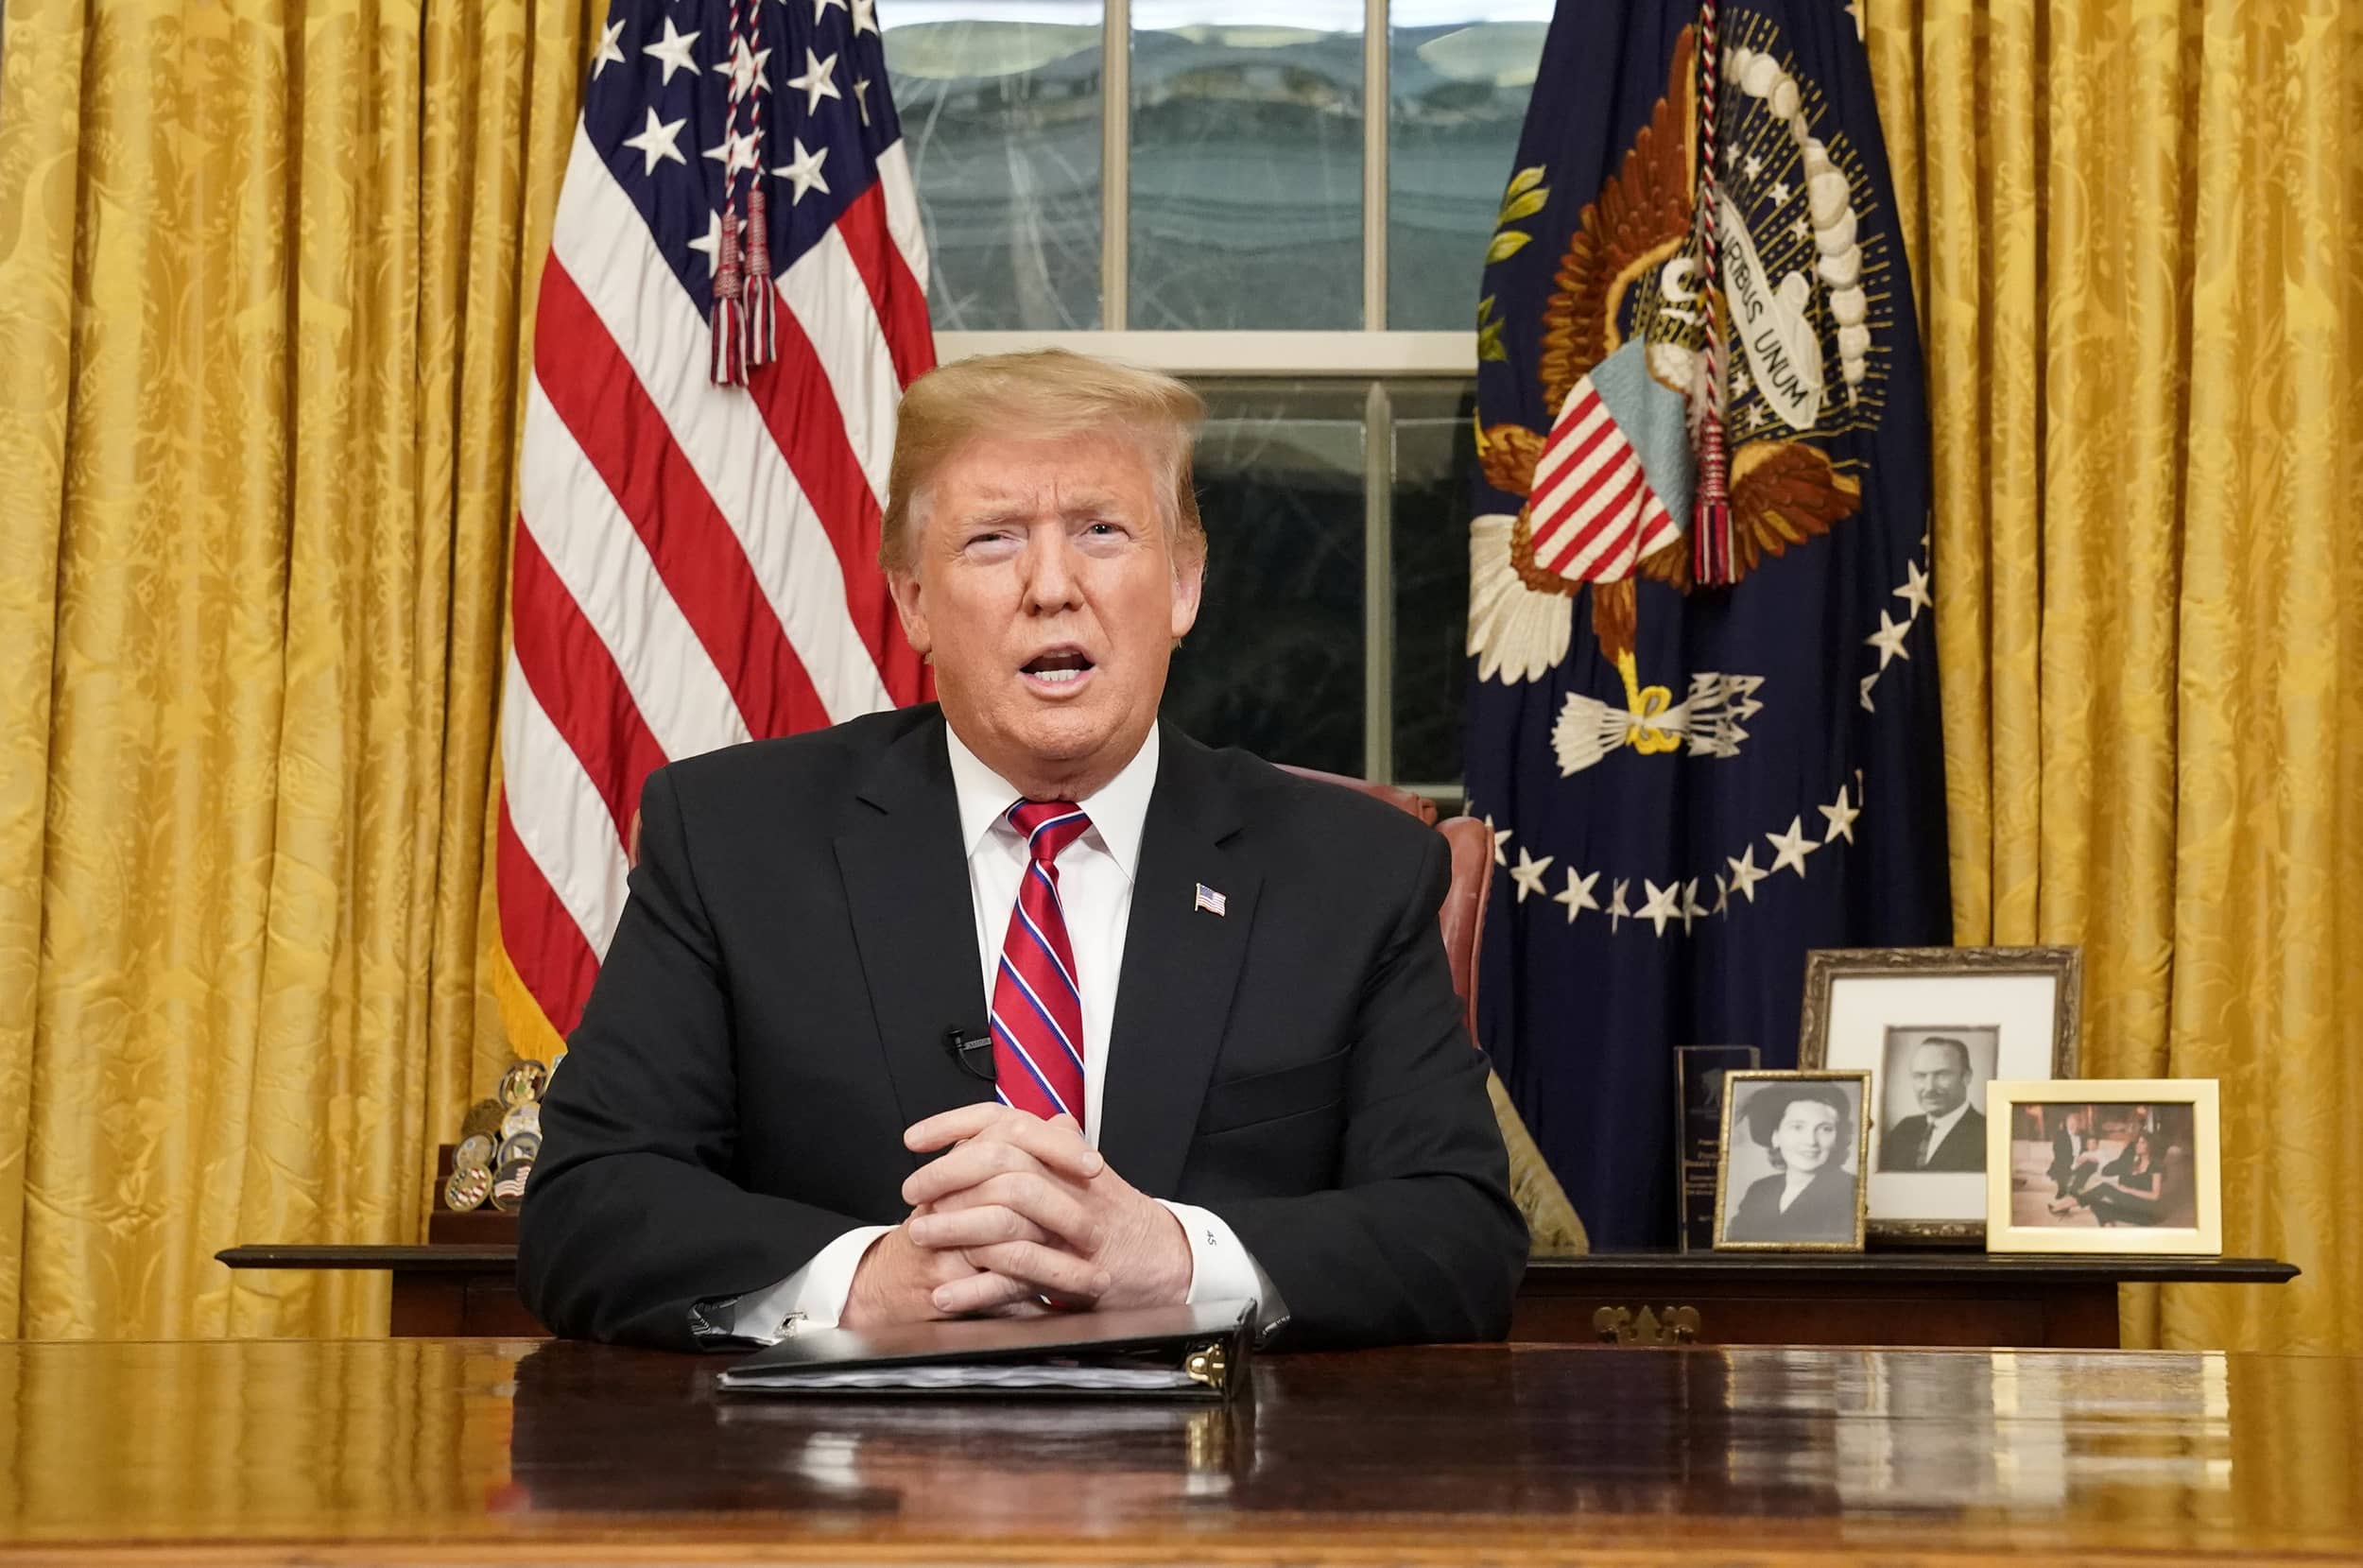 image-u-s-president-trump-delivers-televised-address-about-immigration-and-the-u-s-southern-border-from-the-oval-office-in-washington